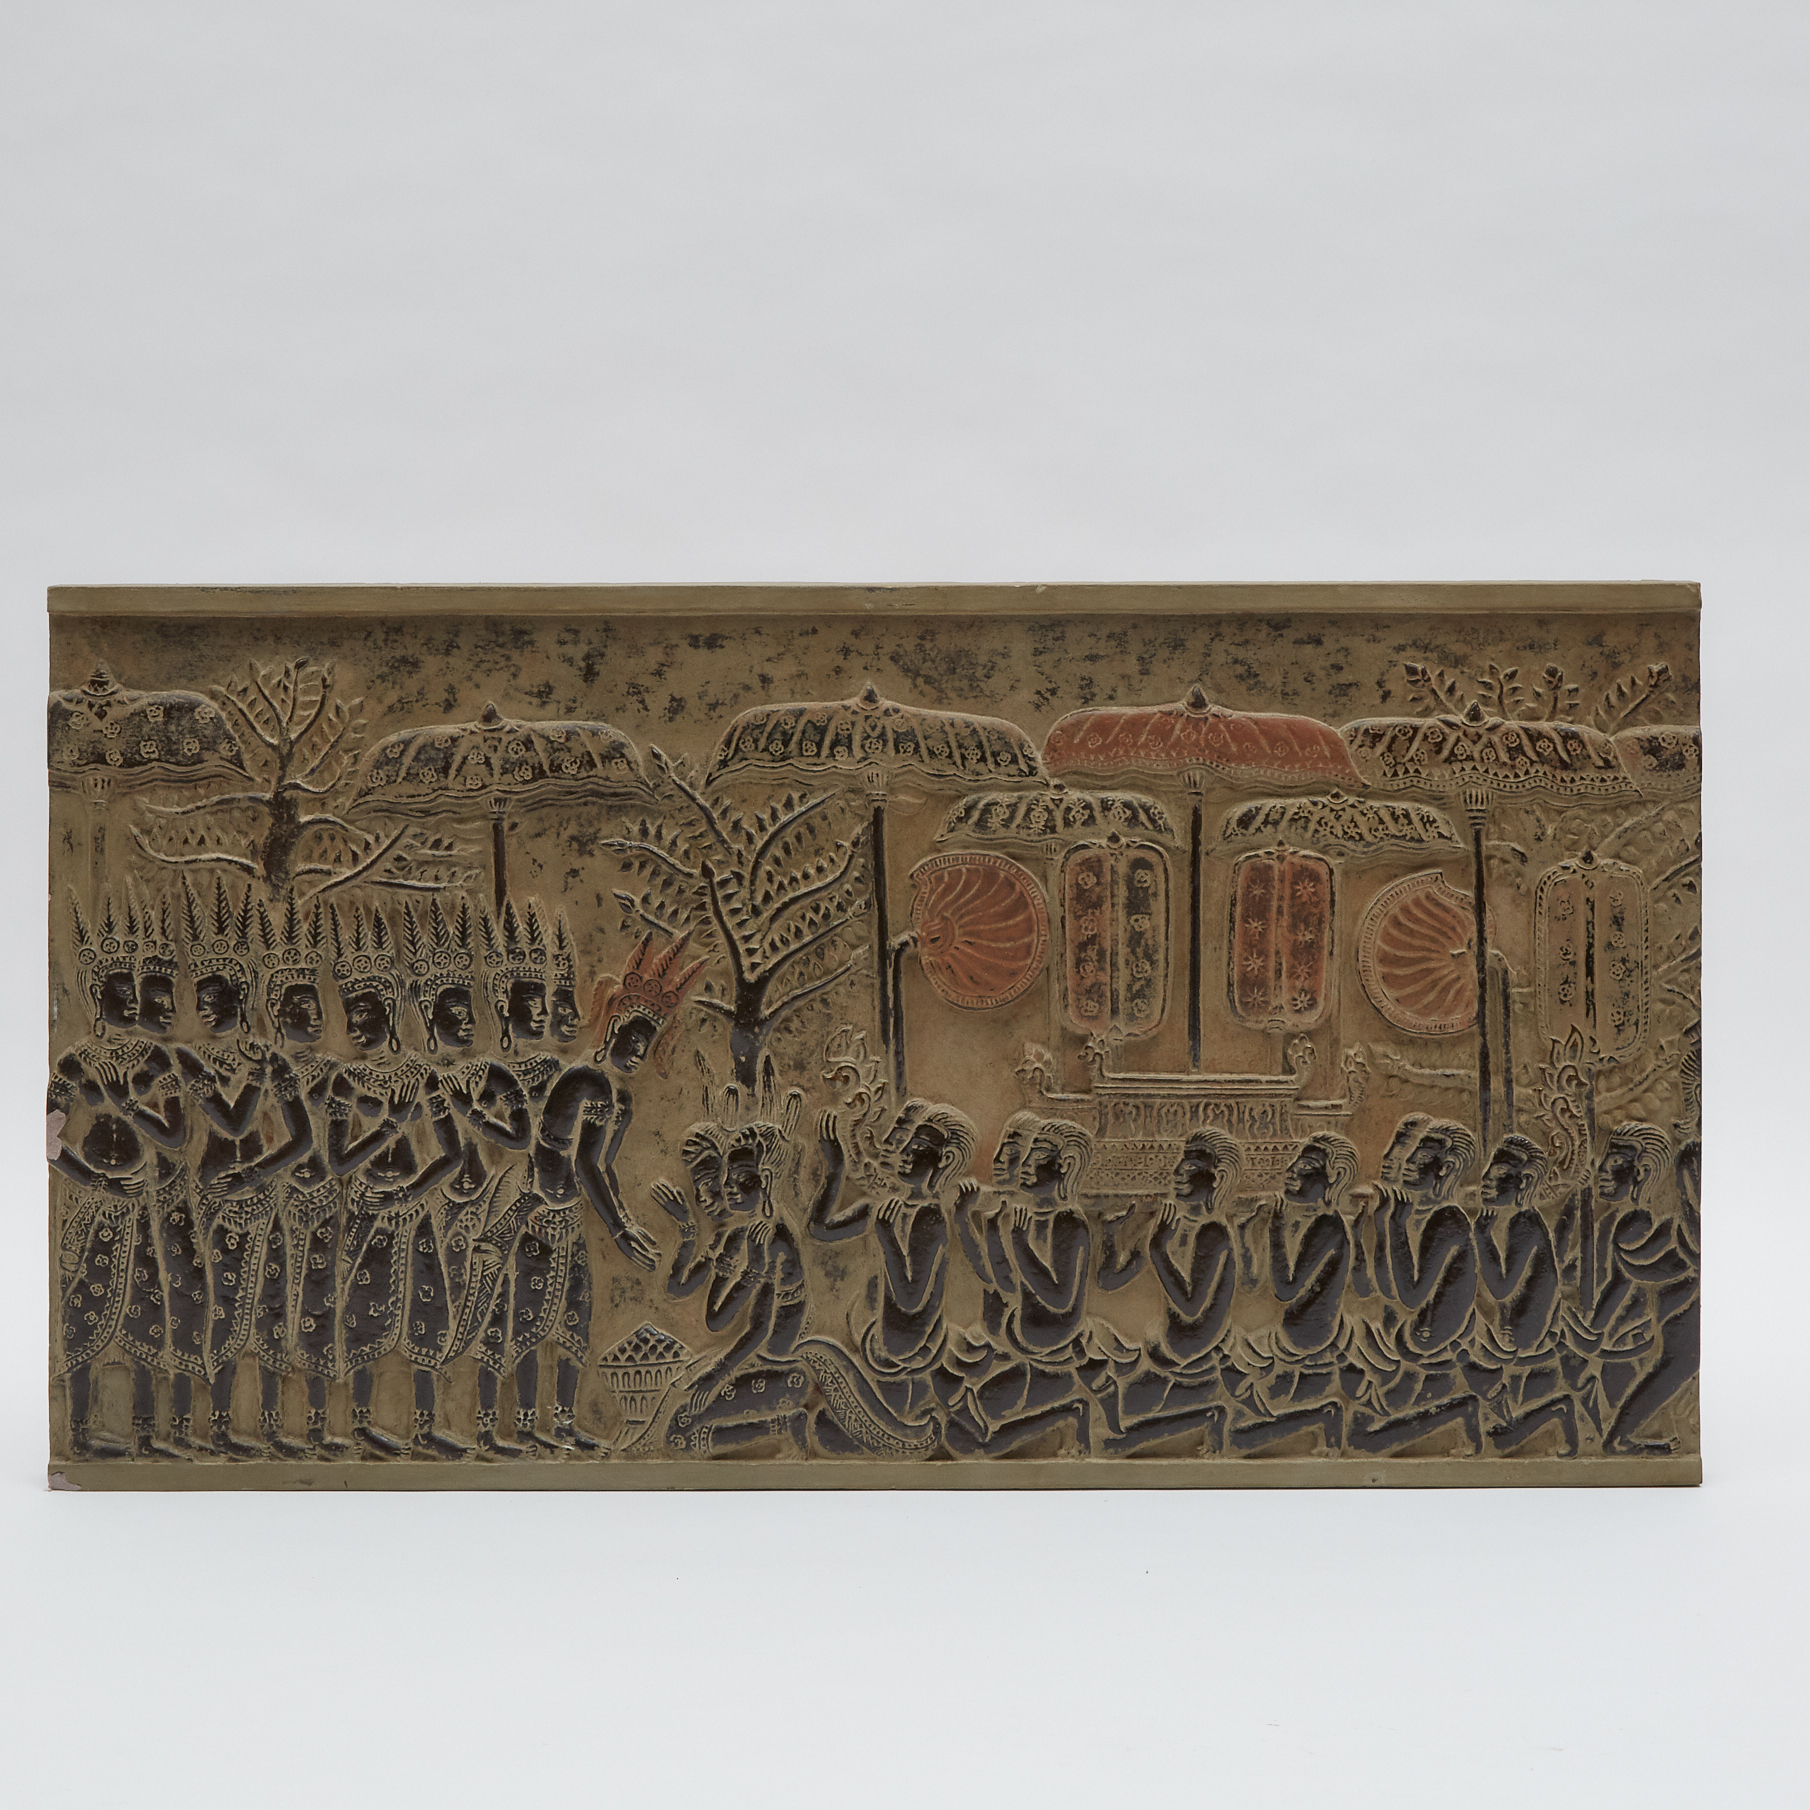 A Southeast Asian Stone Relief Carving of a Procession